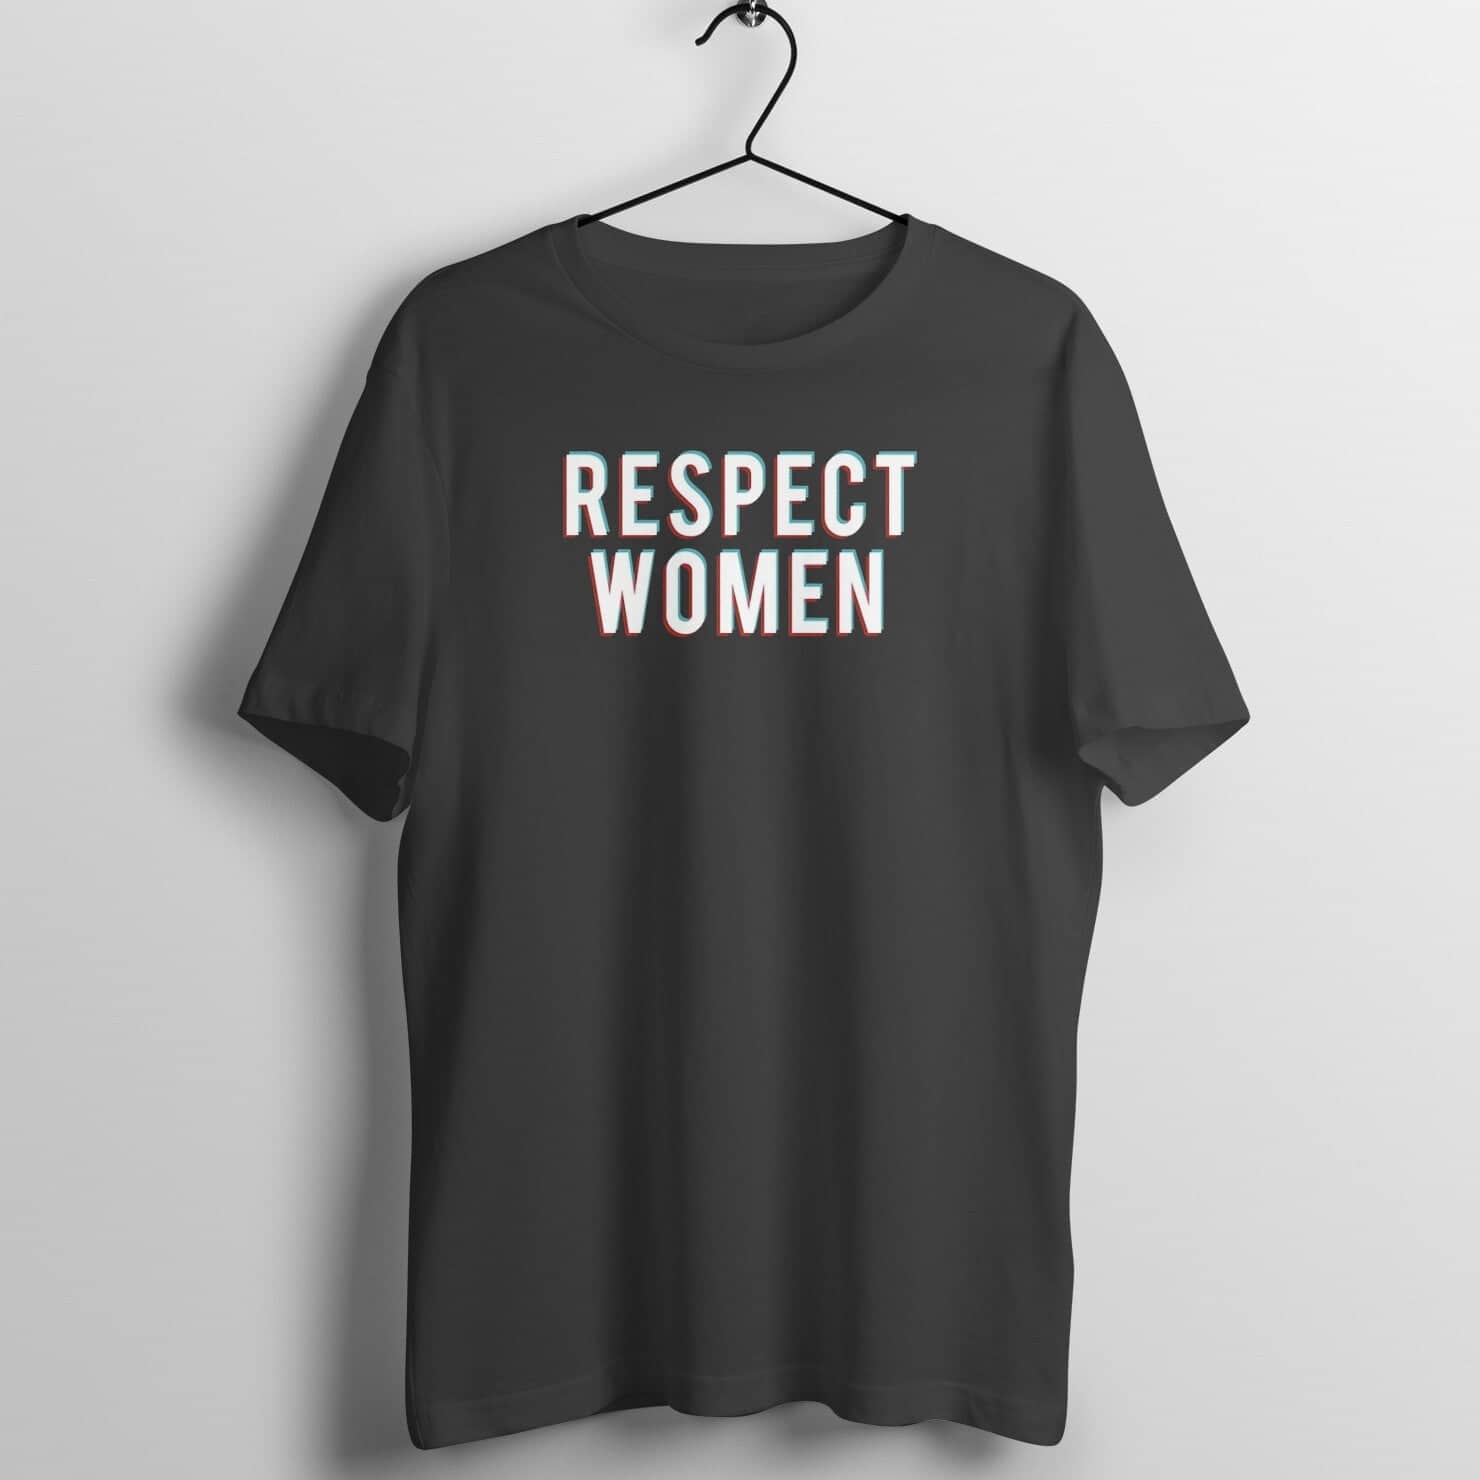 Respect Women Special Black T Shirt for Men and Women Shirts & Tops Printrove Black S 